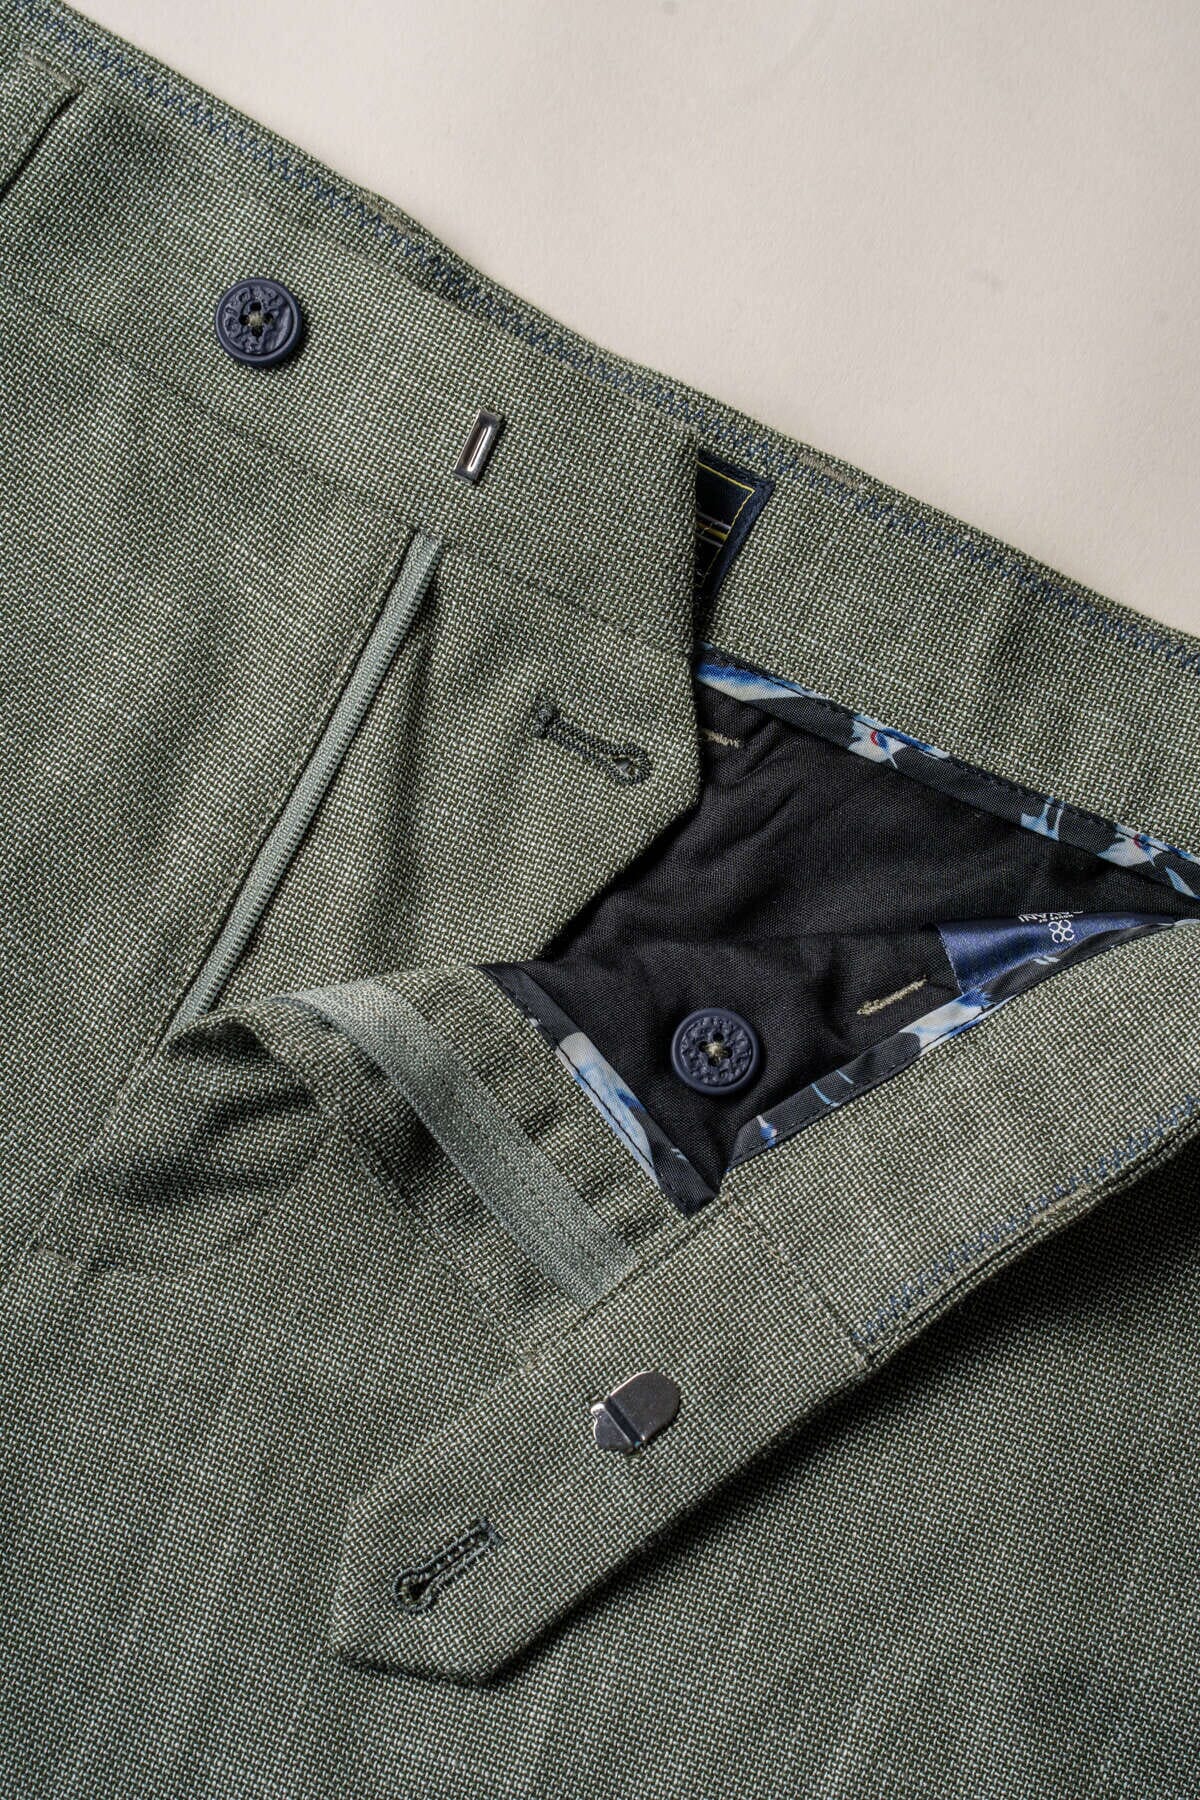 Miami Sage Trousers - Trousers - 